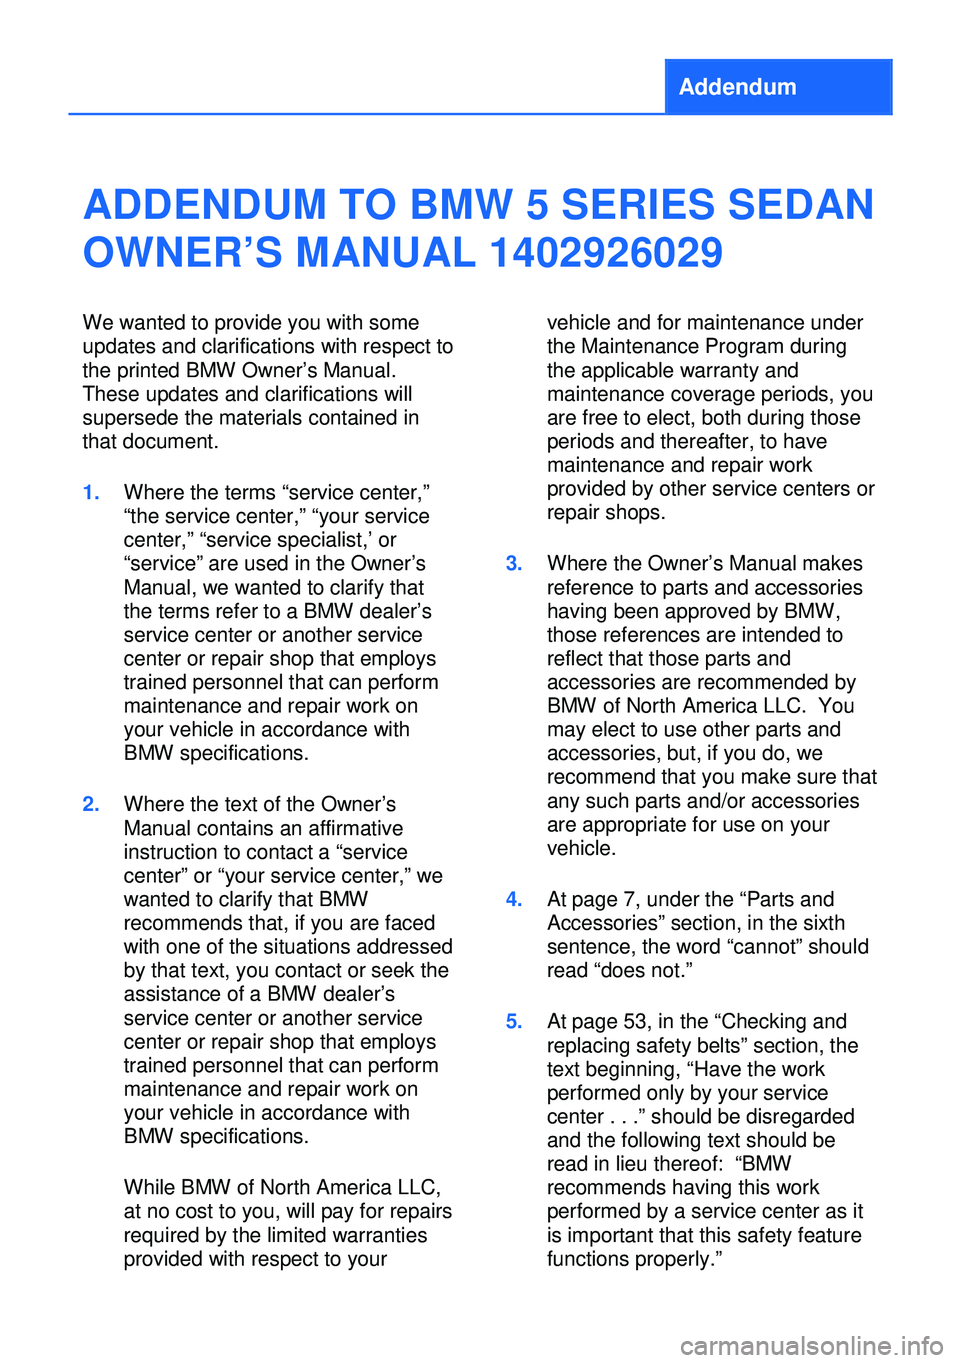 BMW 535I SEDAN 2013  Owners Manual Addendum
ADDENDUM TO BMW 5 SERIES SEDAN
OWNER’S MANUAL 1402926029
We wanted to provide you with some
updates and clarifications with respect to
the printed BMW Owner’s Manual.
These updates and cl